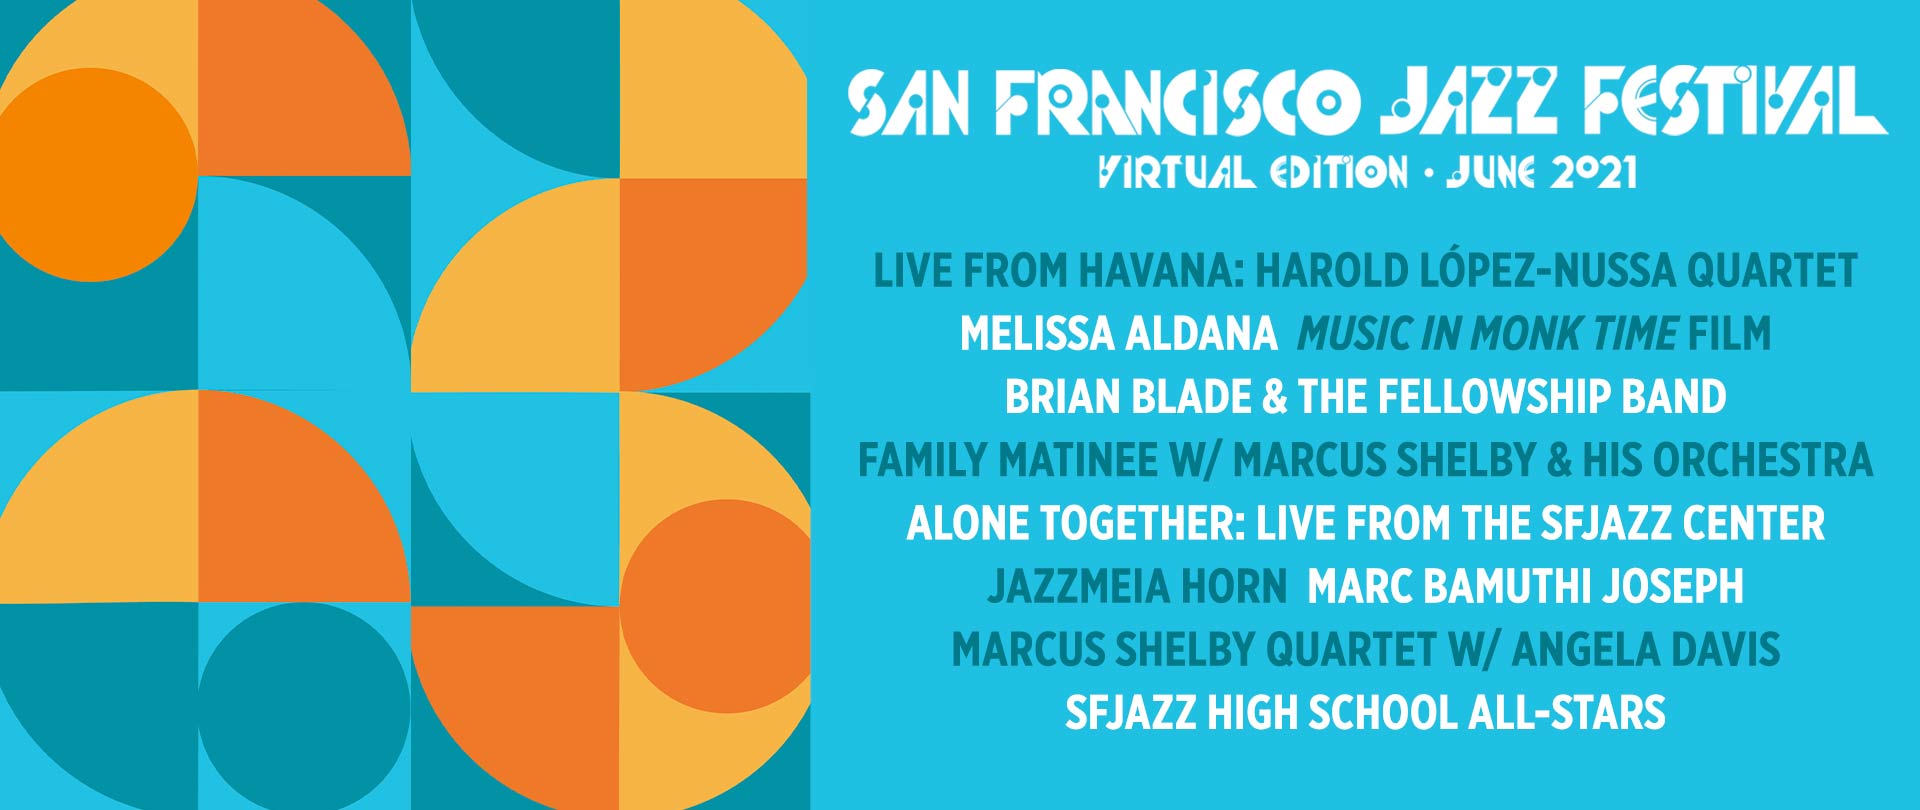 Join us for the Virtual San Francisco Jazz Festival 2021, happening throughout the month of June at sfjazz.org